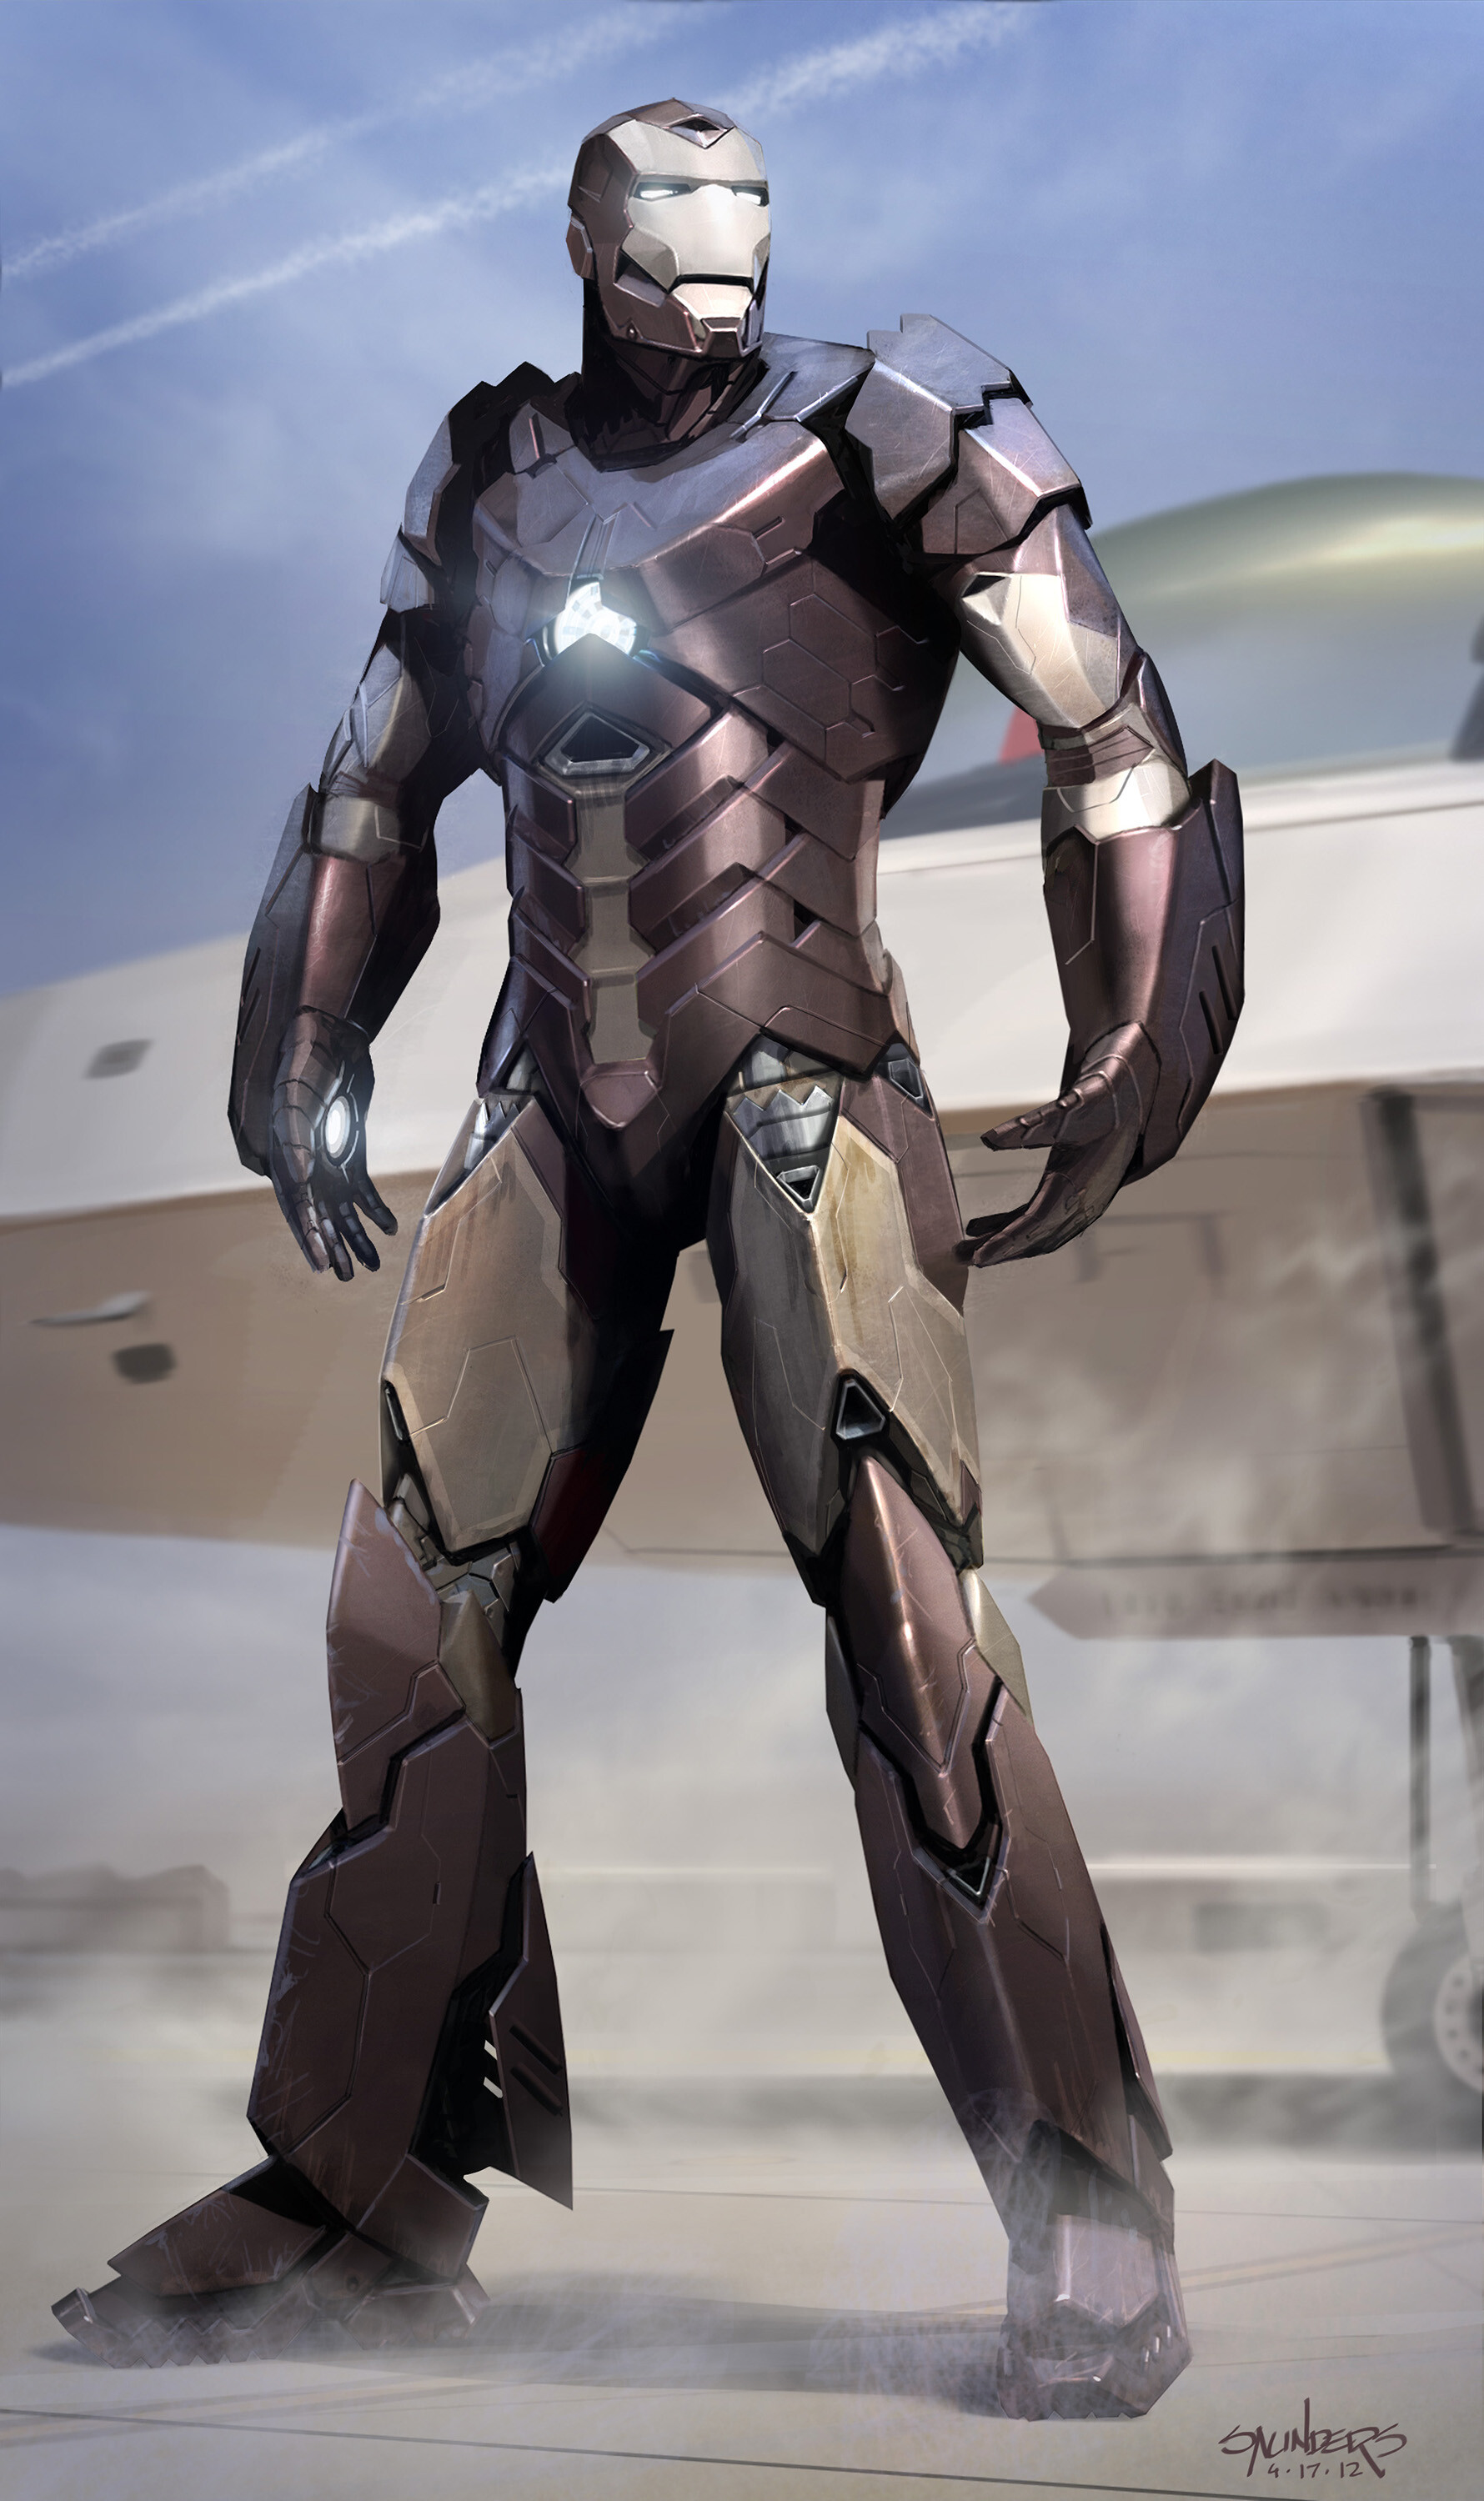 Avengers: Infinity War - Iron Man Mk 50 suit-up by Phil Saunders